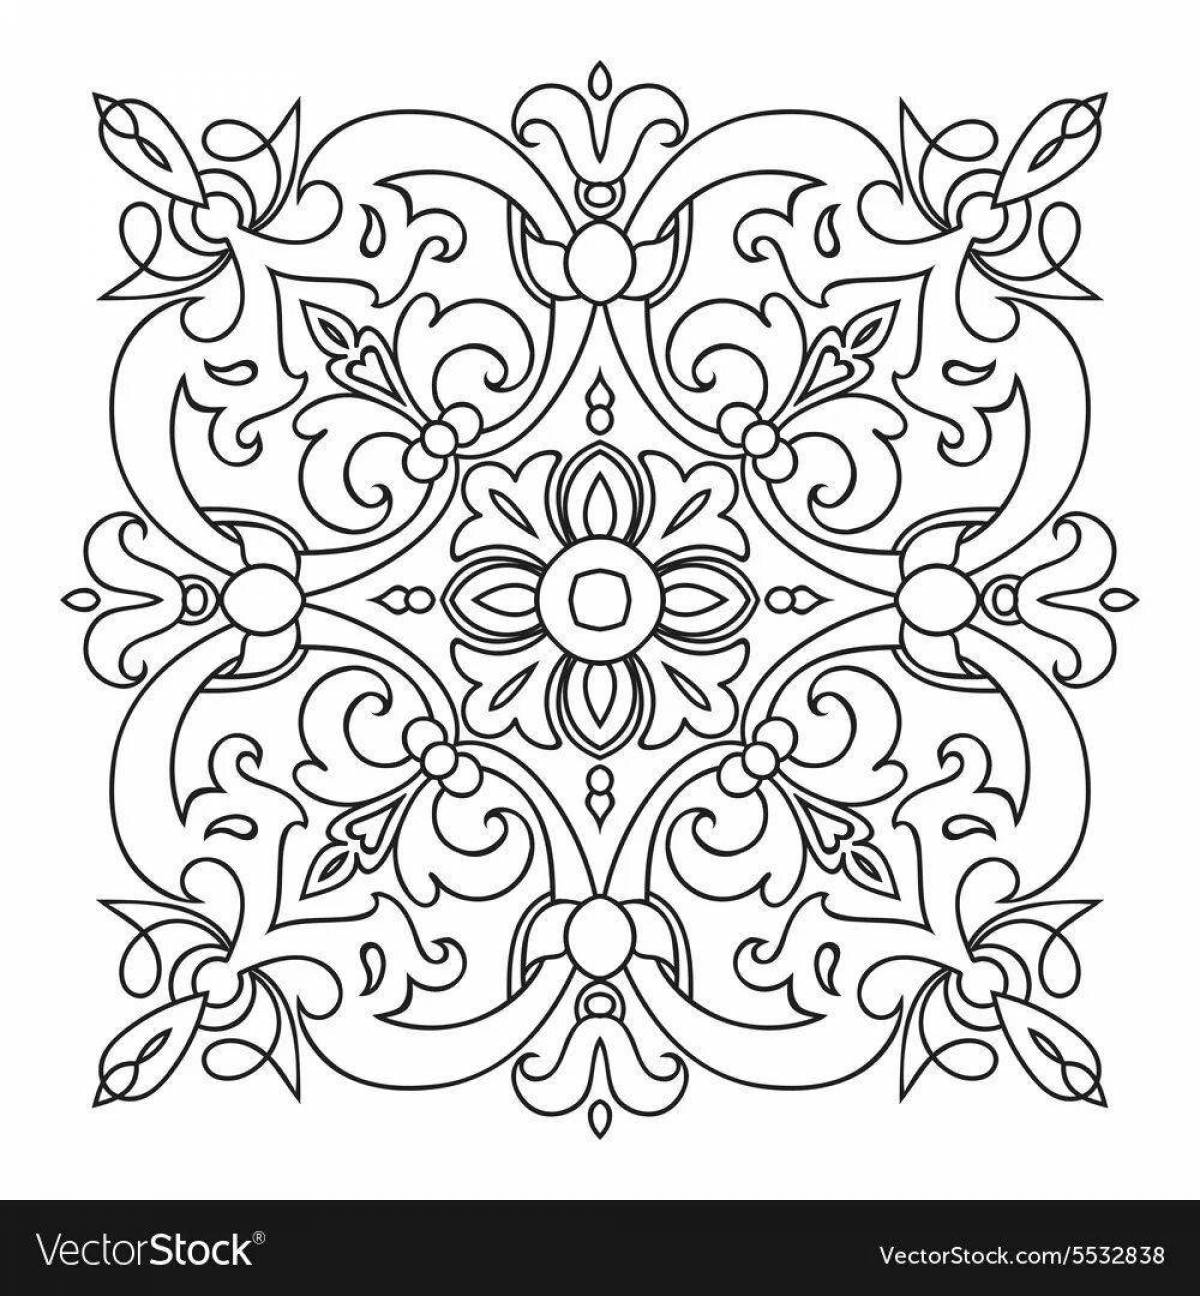 Fabulous Pavloposad scarf coloring book for children